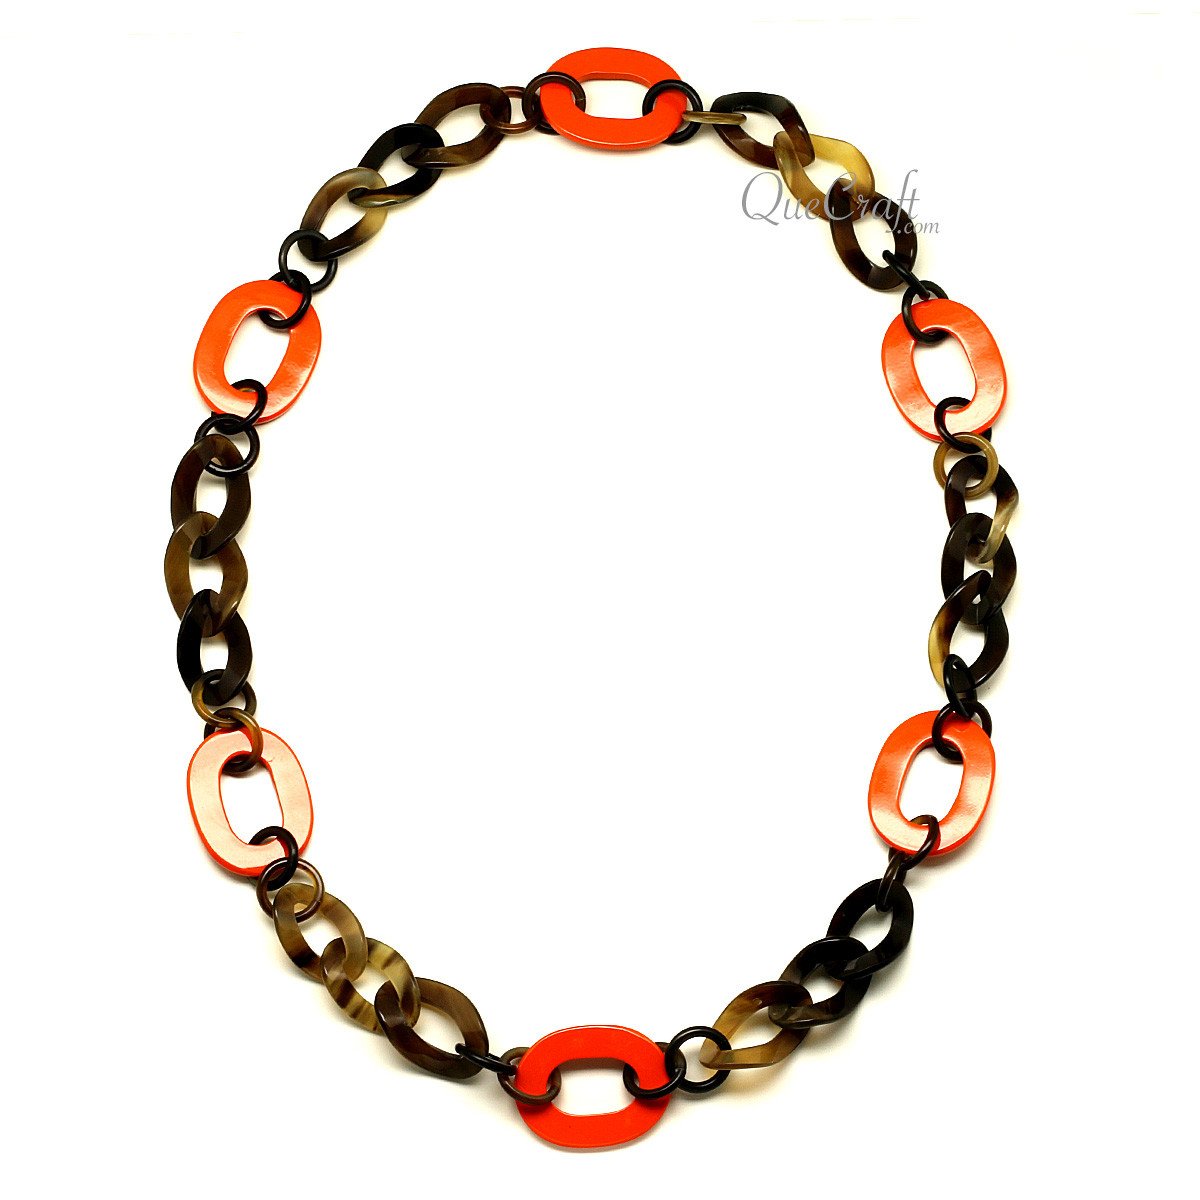 Horn & Lacquer Chain Necklace #12254 - HORN JEWELRY